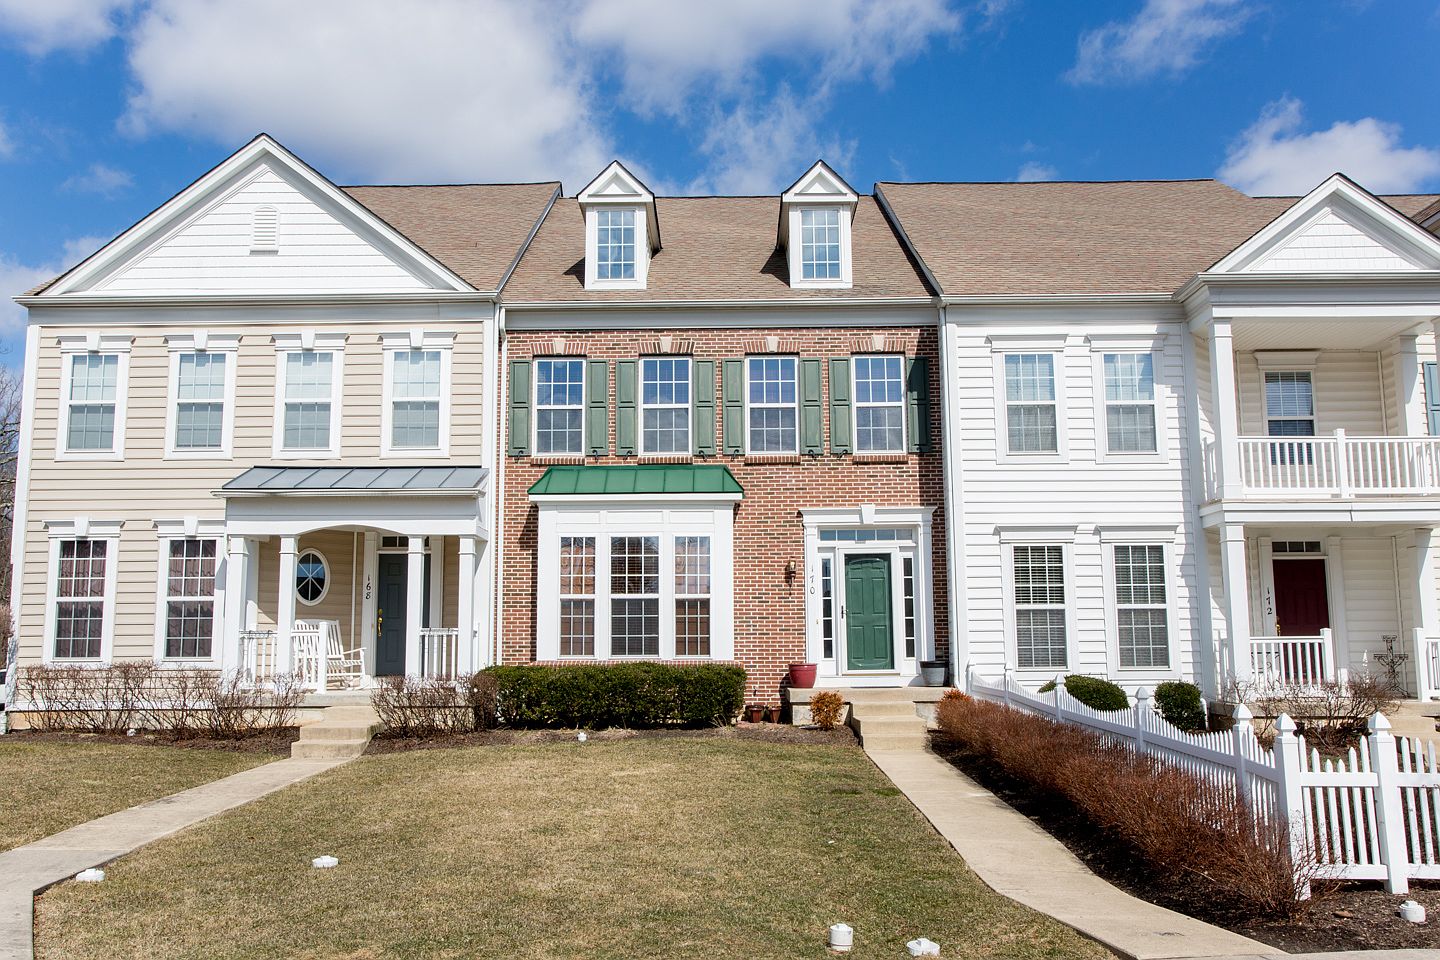 170 Pipers Inn Dr, Fountainville, PA 18923 | Zillow